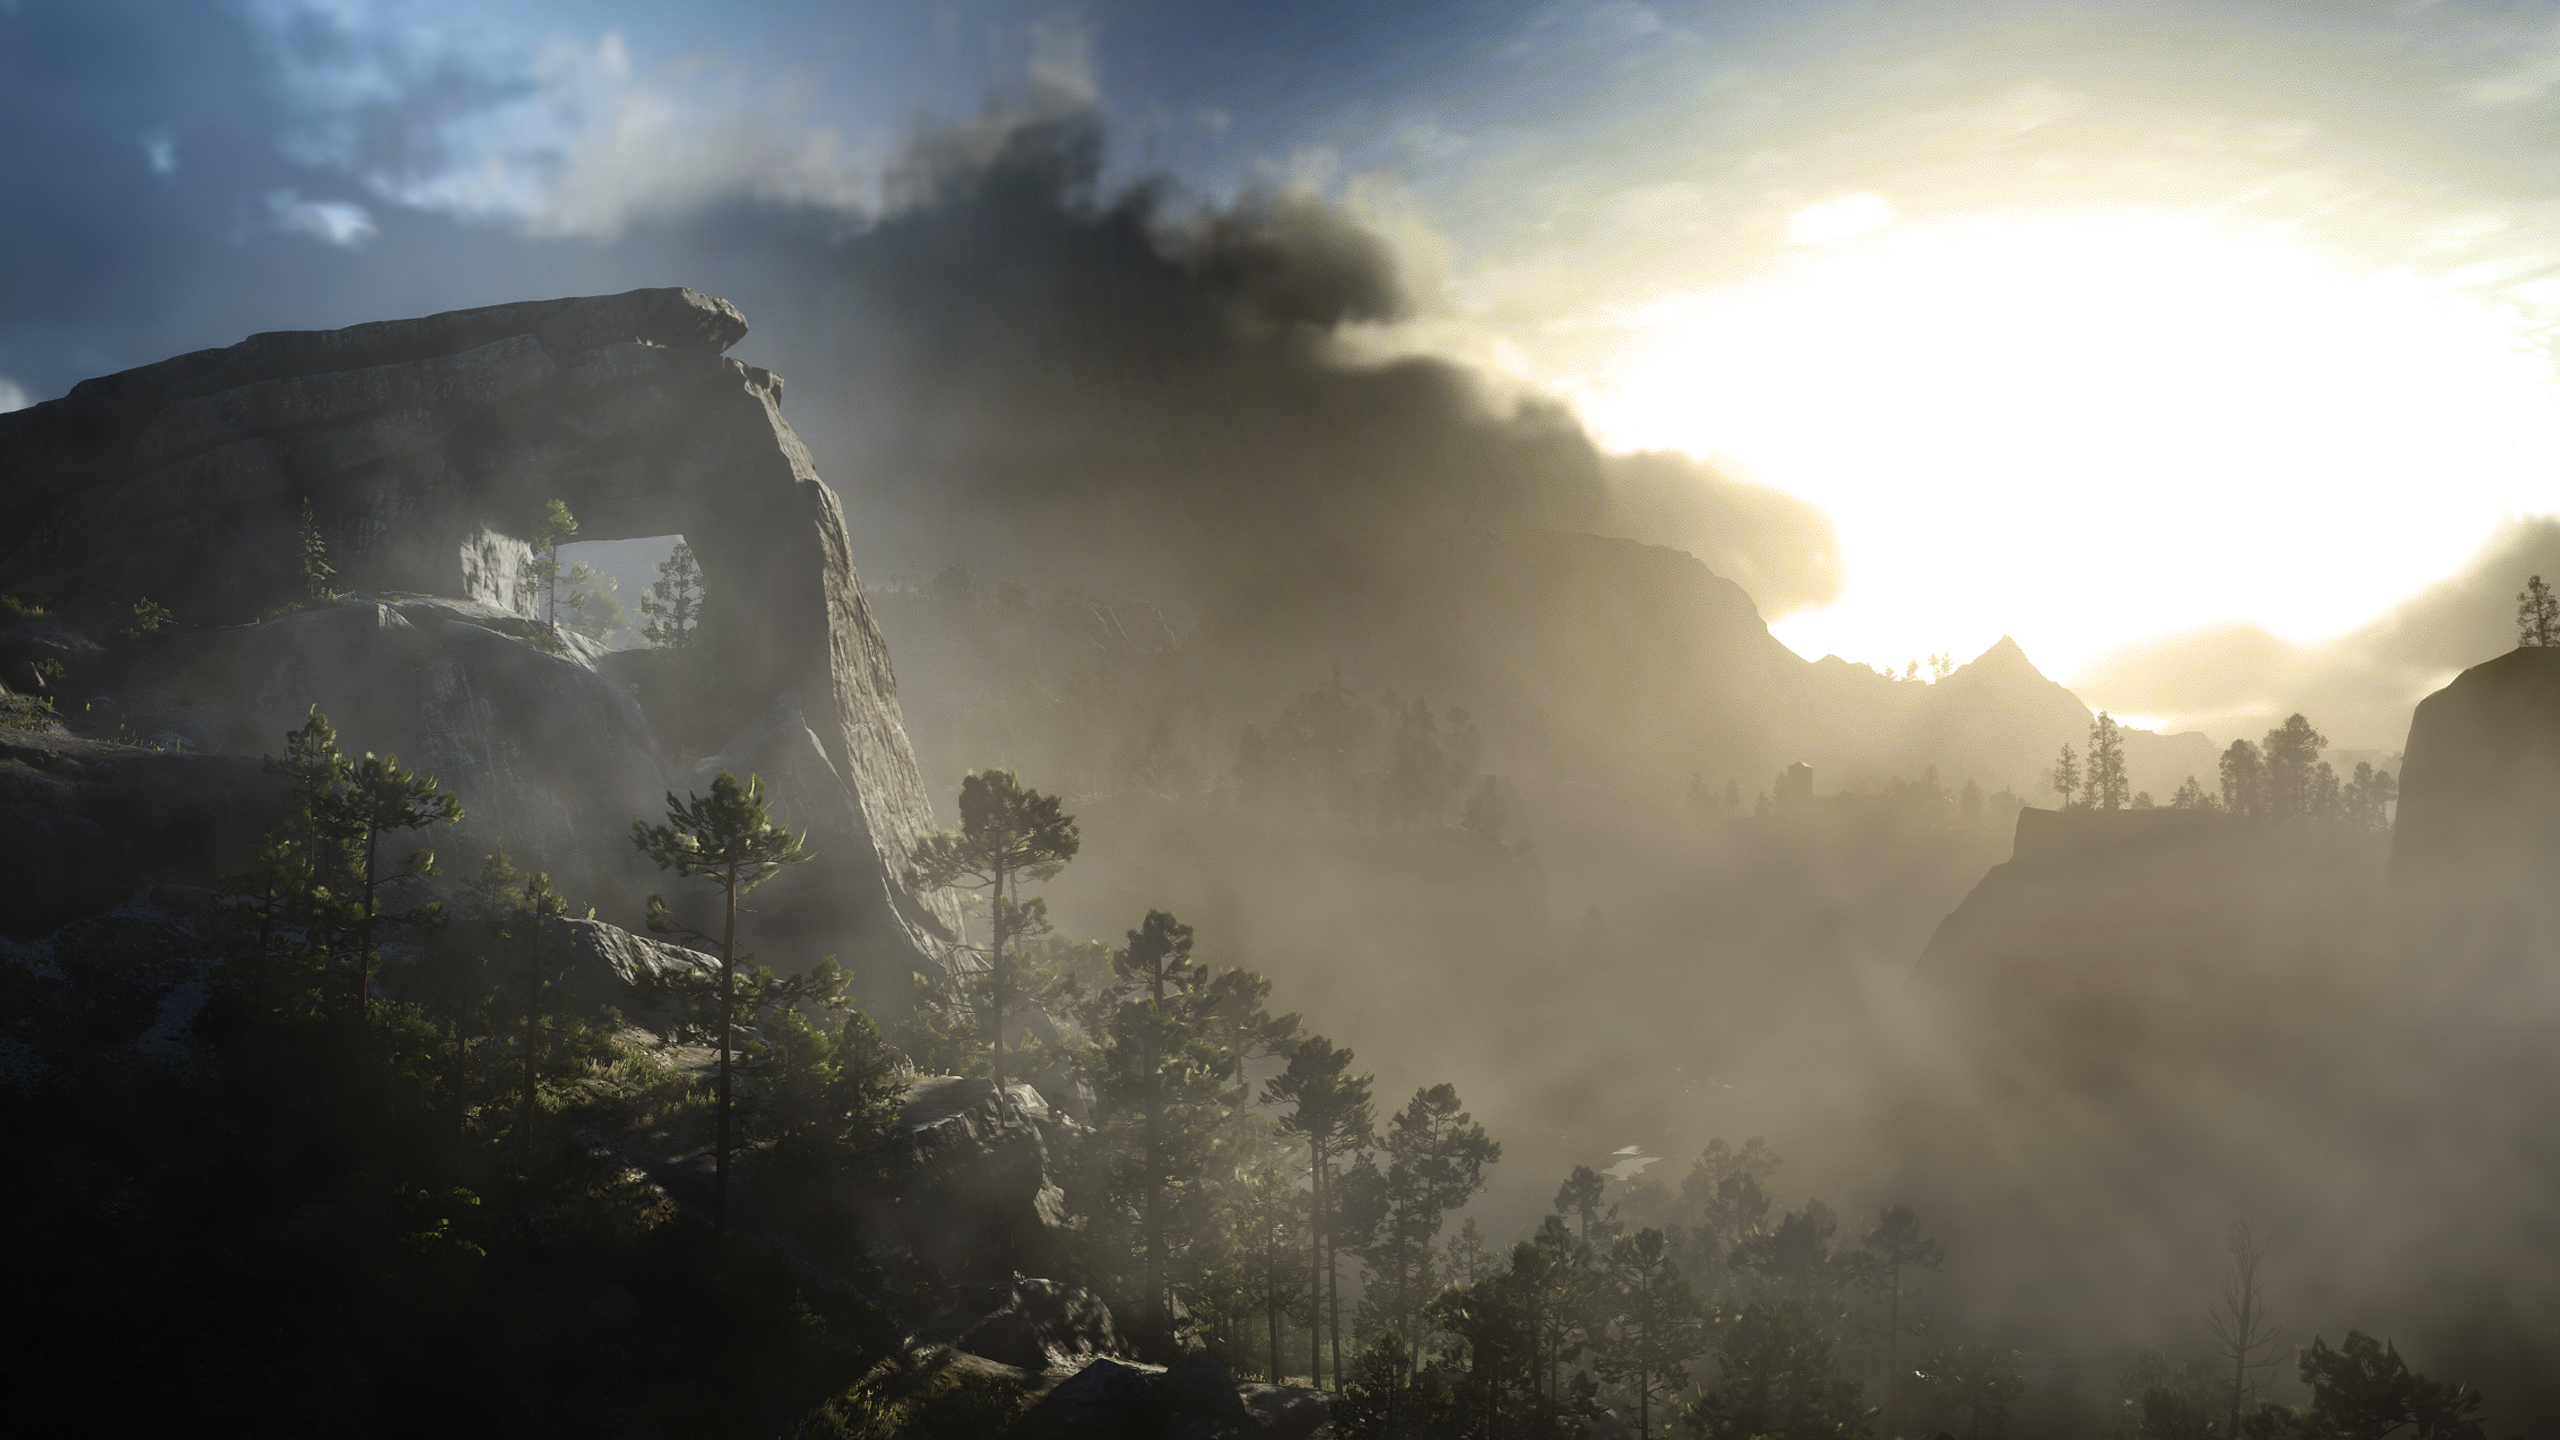 Red Dead Redemption 2 Cliff Daylight Mist Nature Sunset Clouds Video Game Art Video Games Sky Sunlig 2560x1440